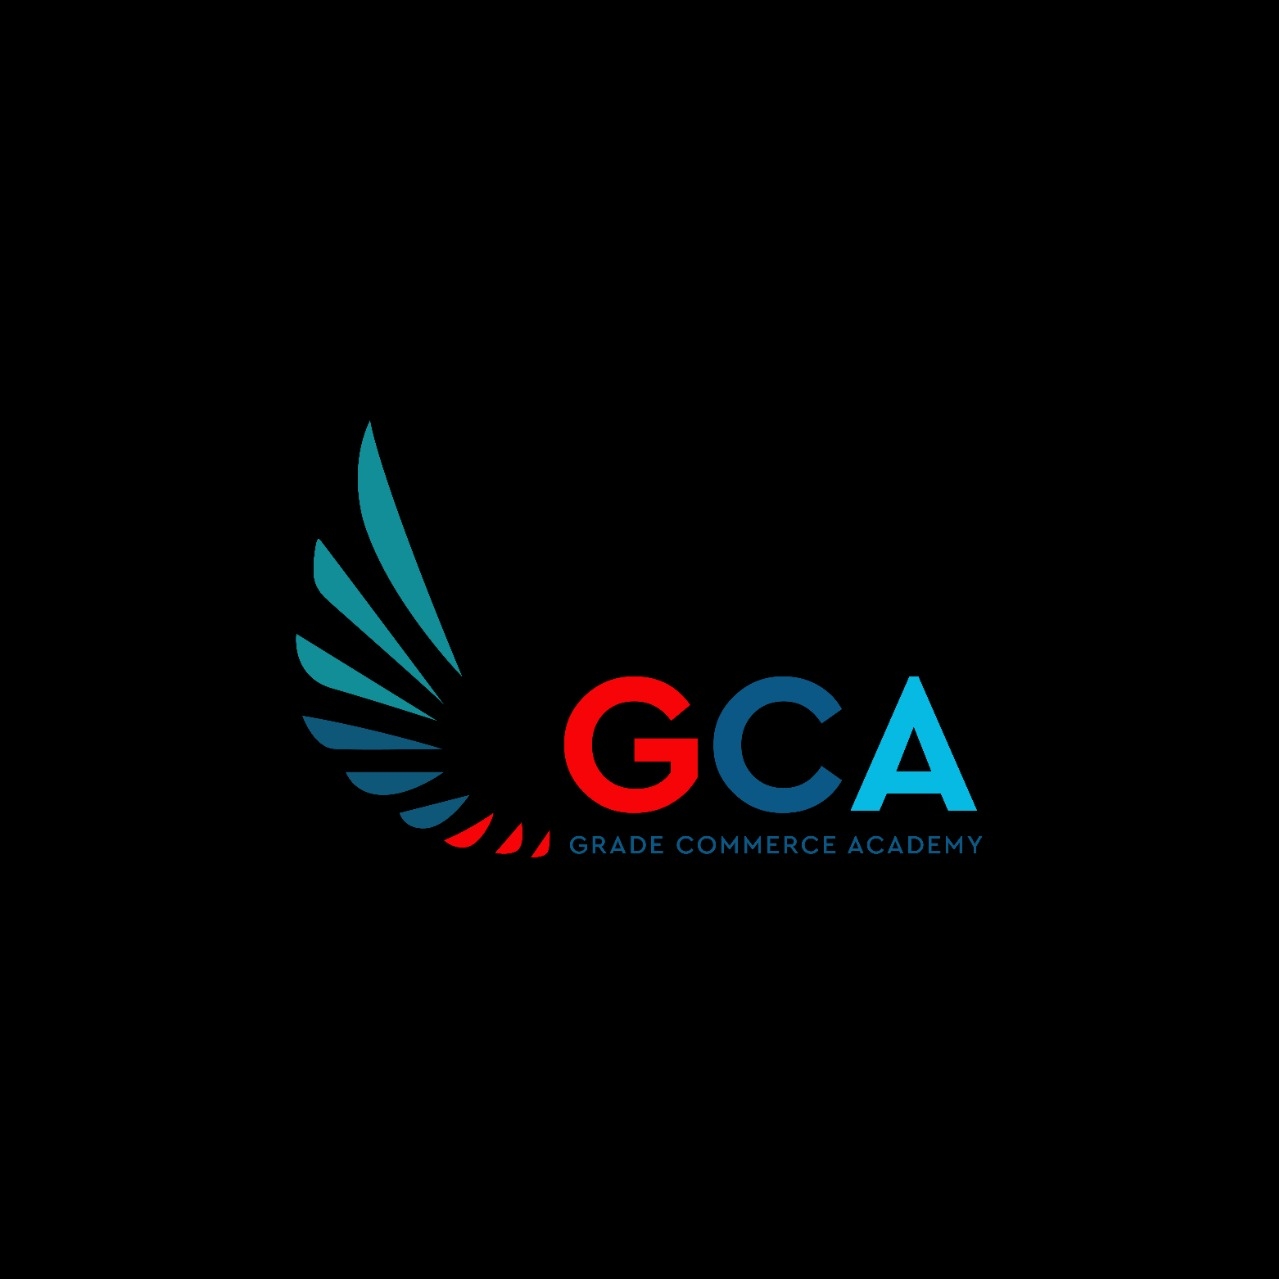 GRADE COMMERCE ACADEMY|Accounting Services|Professional Services